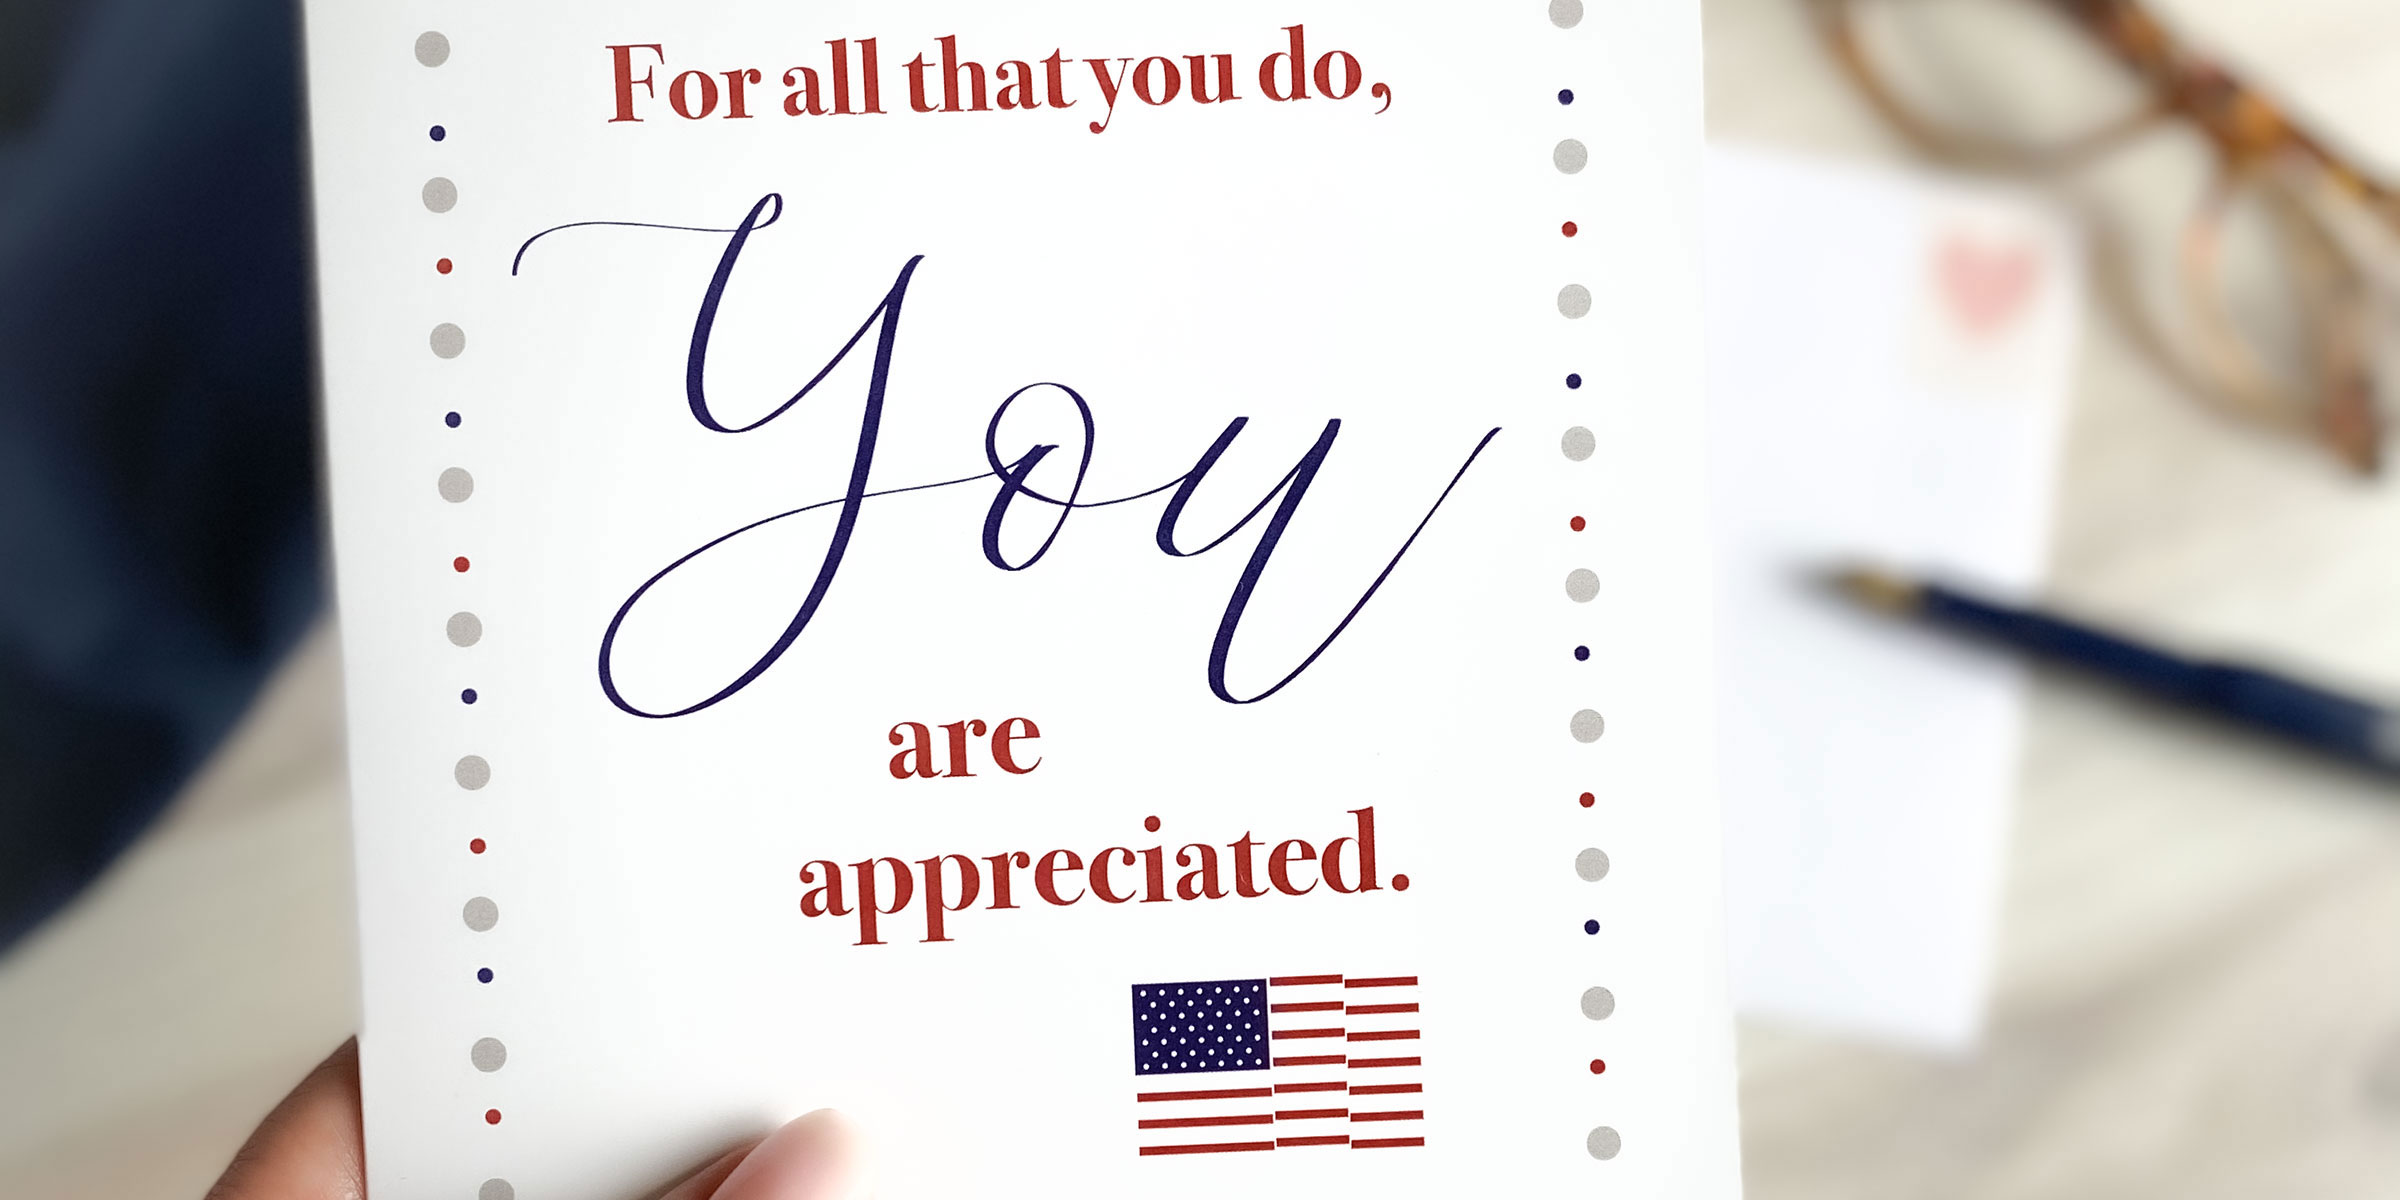 Military Spouse Appreciation - military greeting card and envelope - by 2MyHero